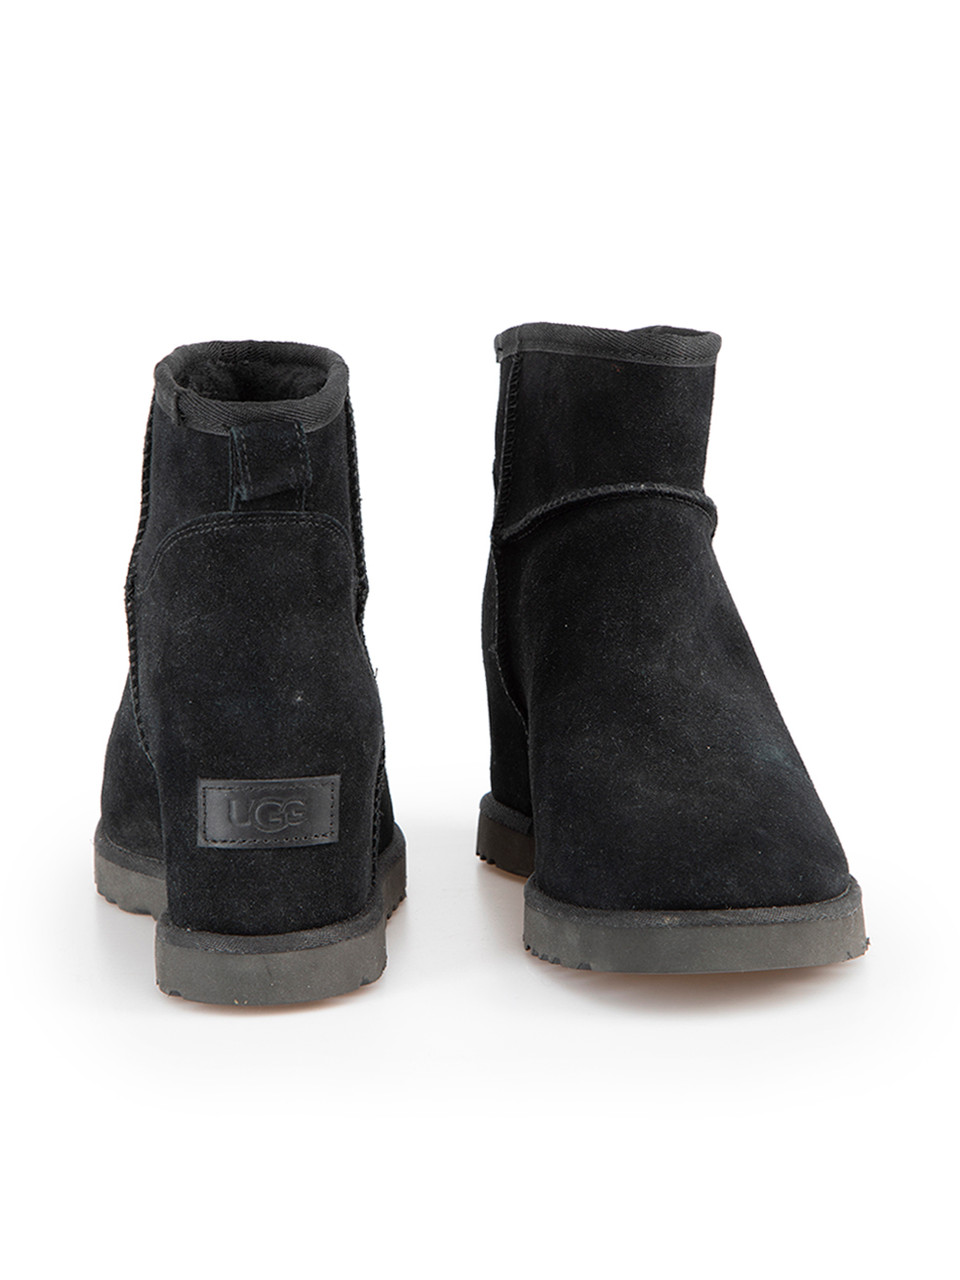 UGG Black Suede Shearling Lined Boots